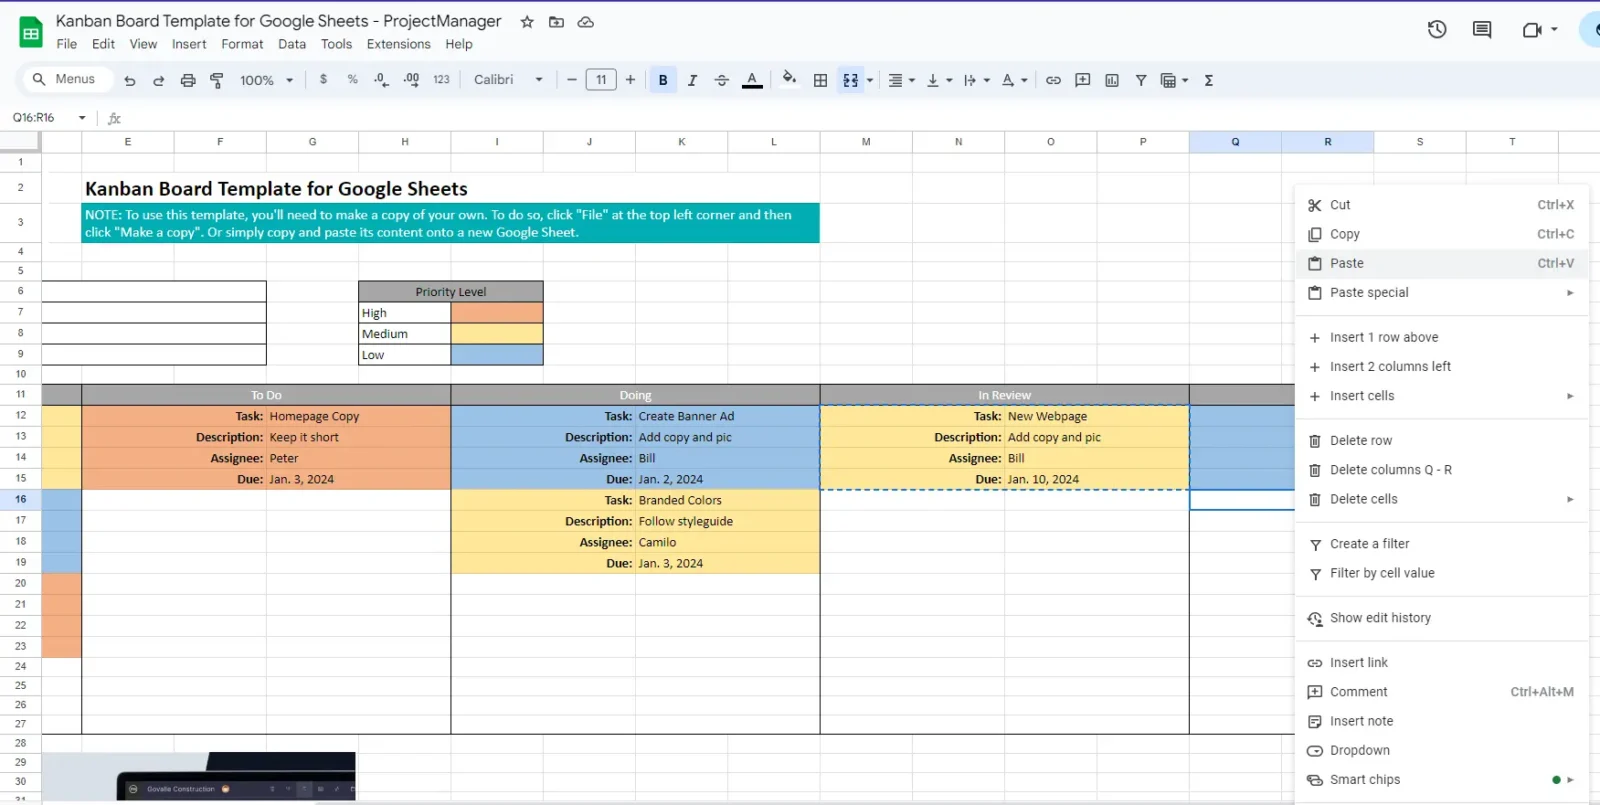 pasting a kanban card into a new column using the free Google Sheets kanban board from ProjectManager